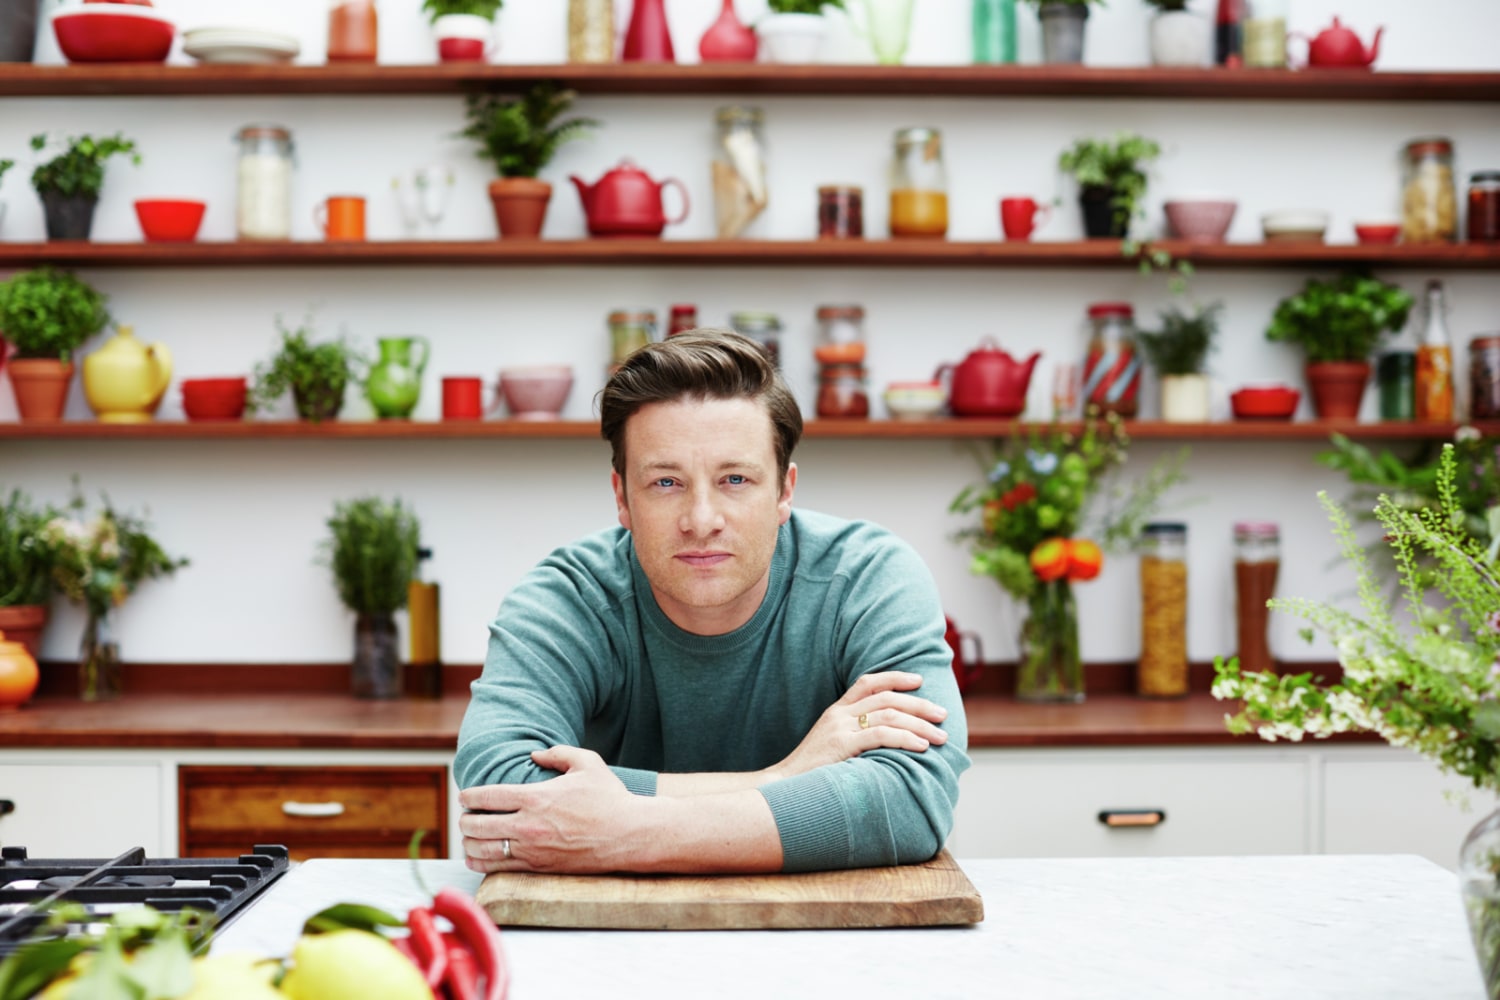 Learn How to Eat Healthy, Jamie Oliver-Style, in 'Everyday Super Food